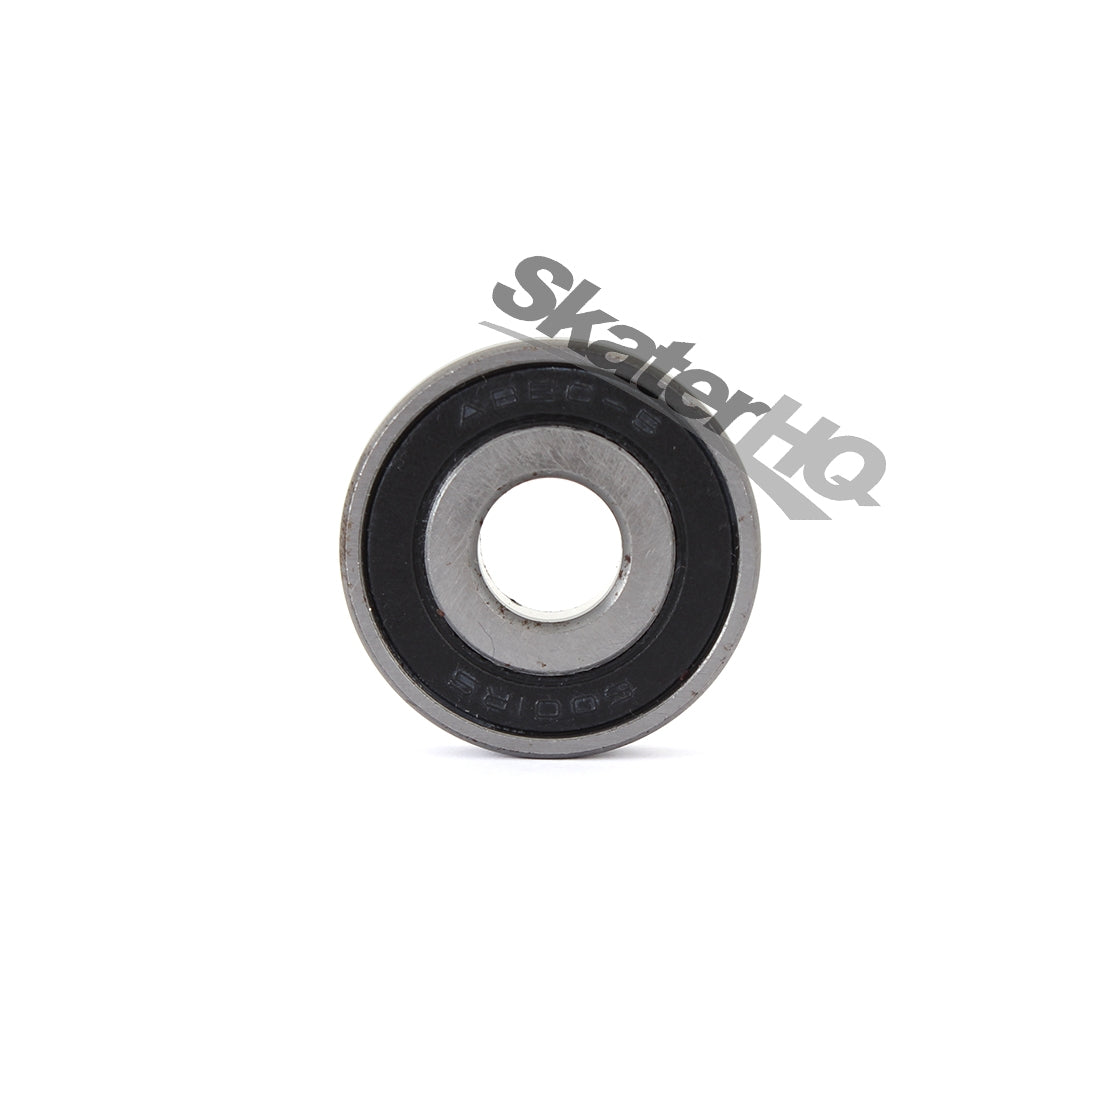 MBS 9.5x28mm Bearing - Single Skateboard Hardware and Parts